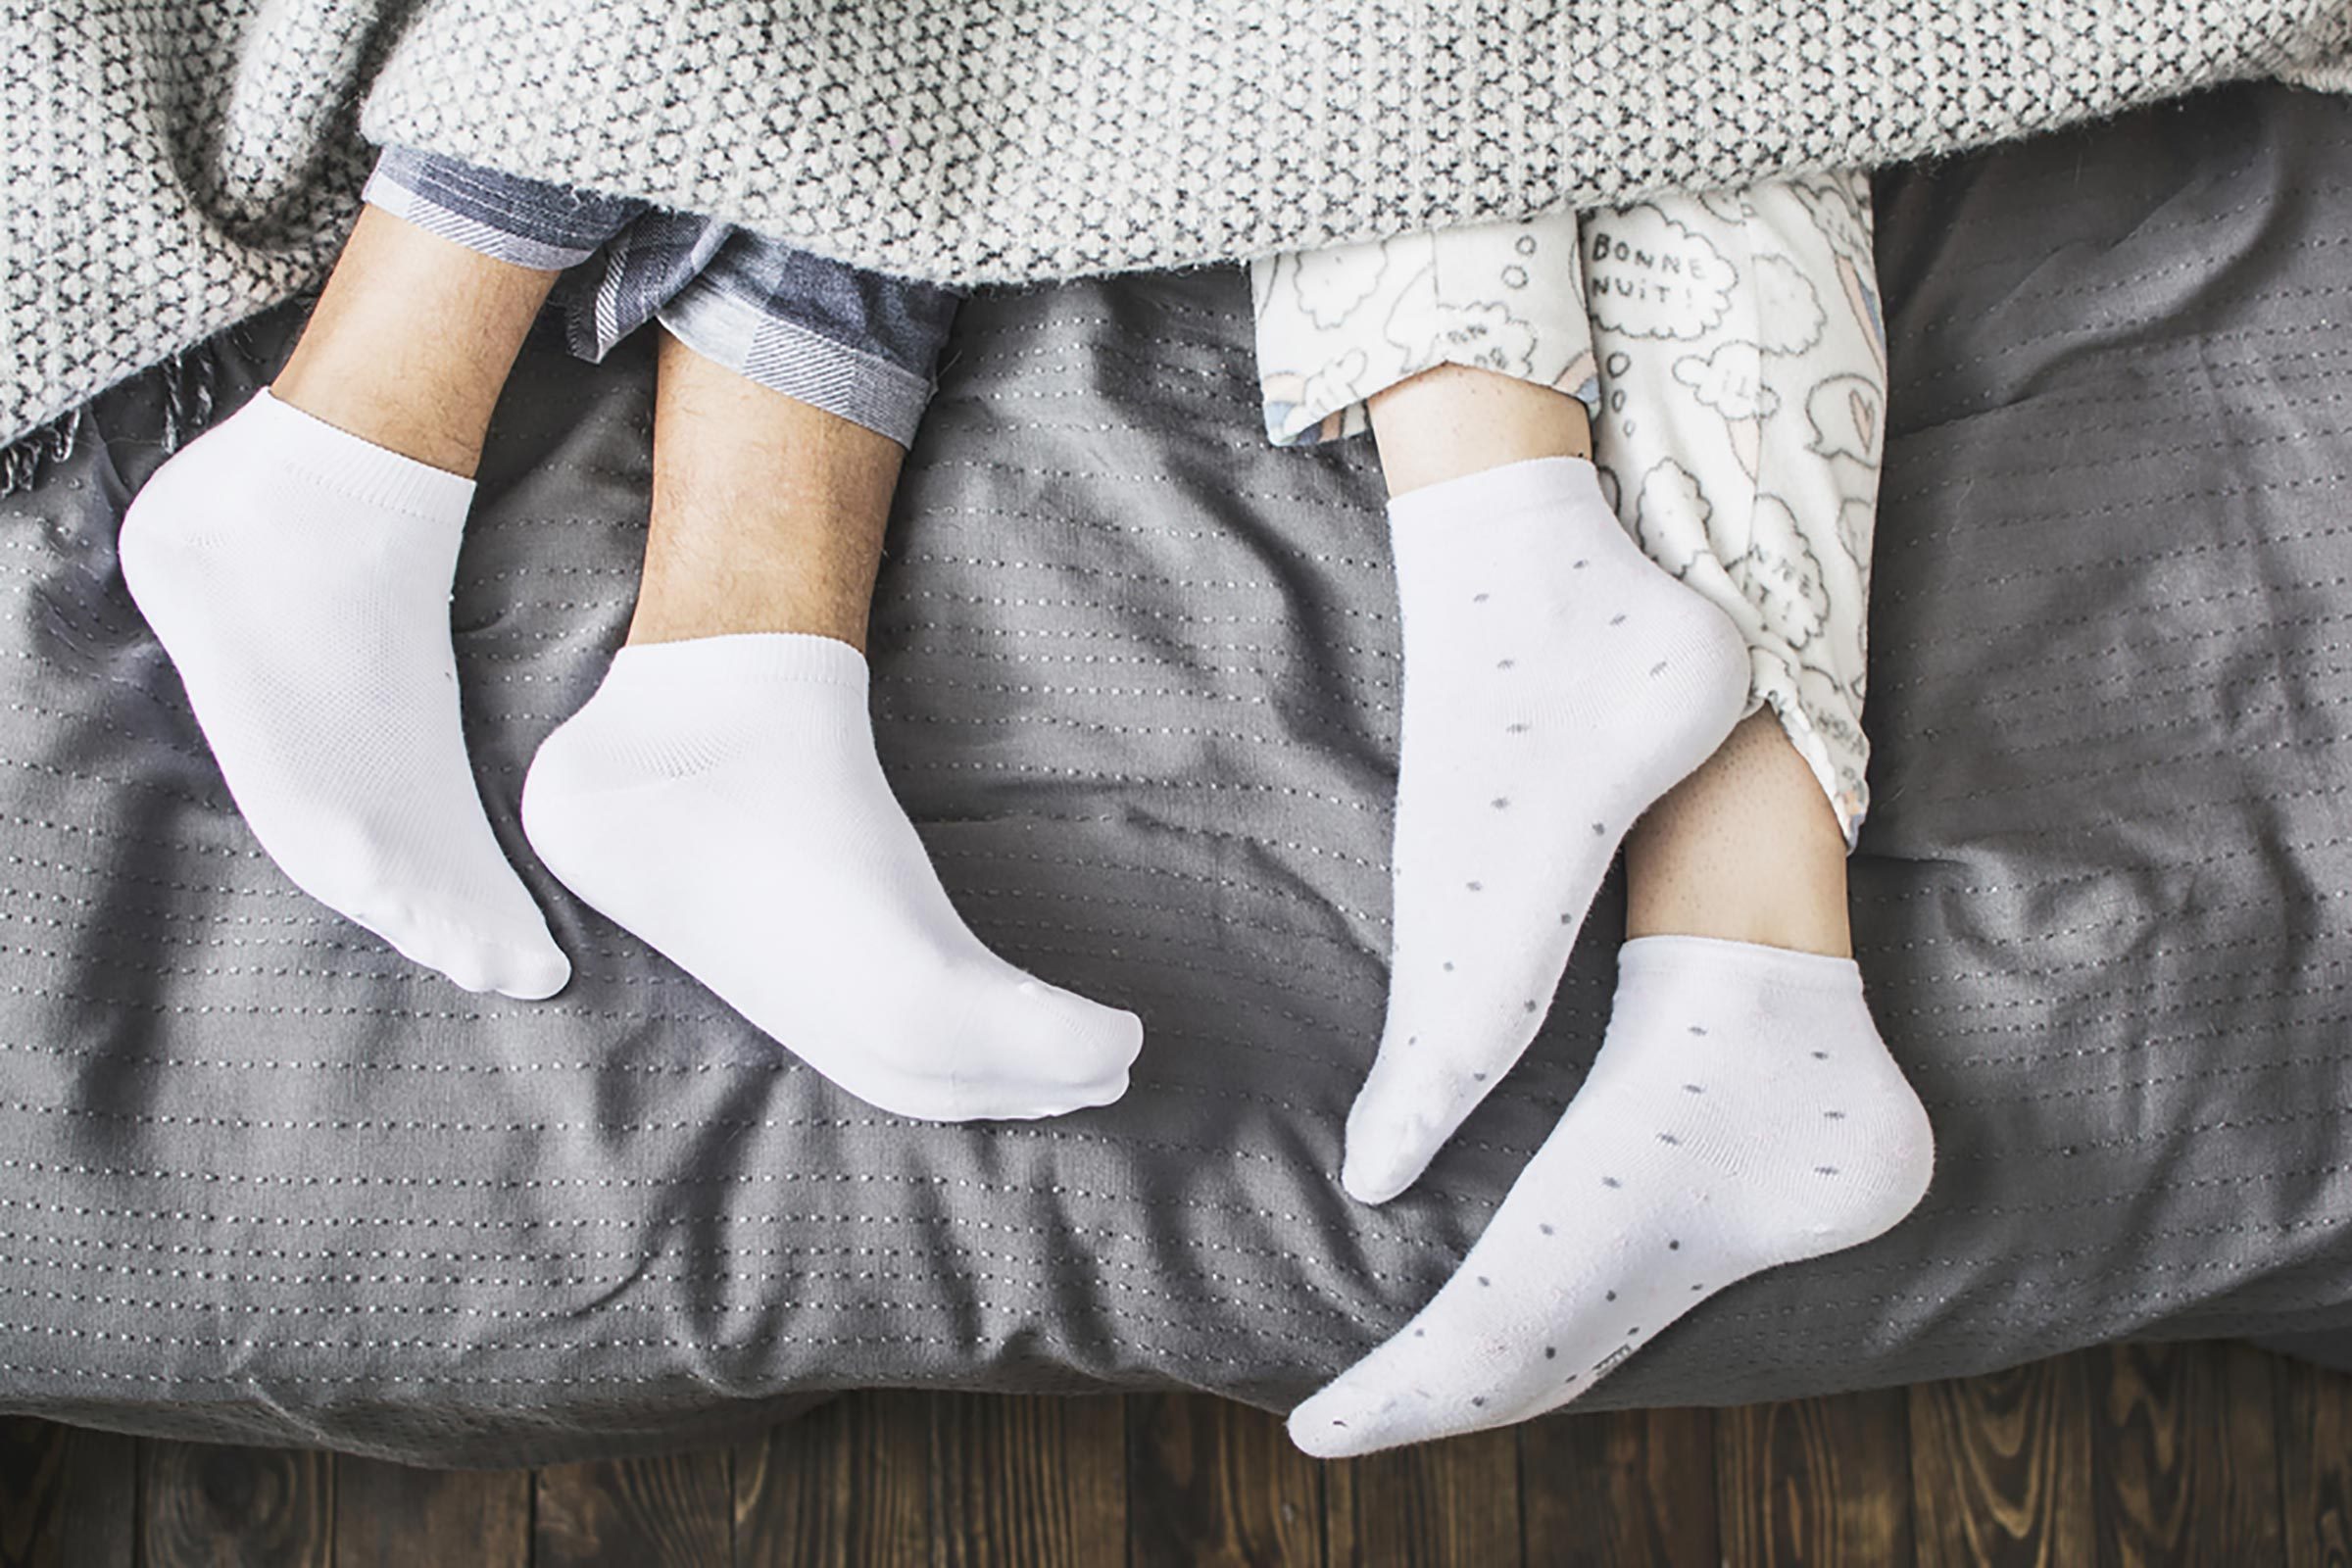 Why You Should Wear Socks to Bed